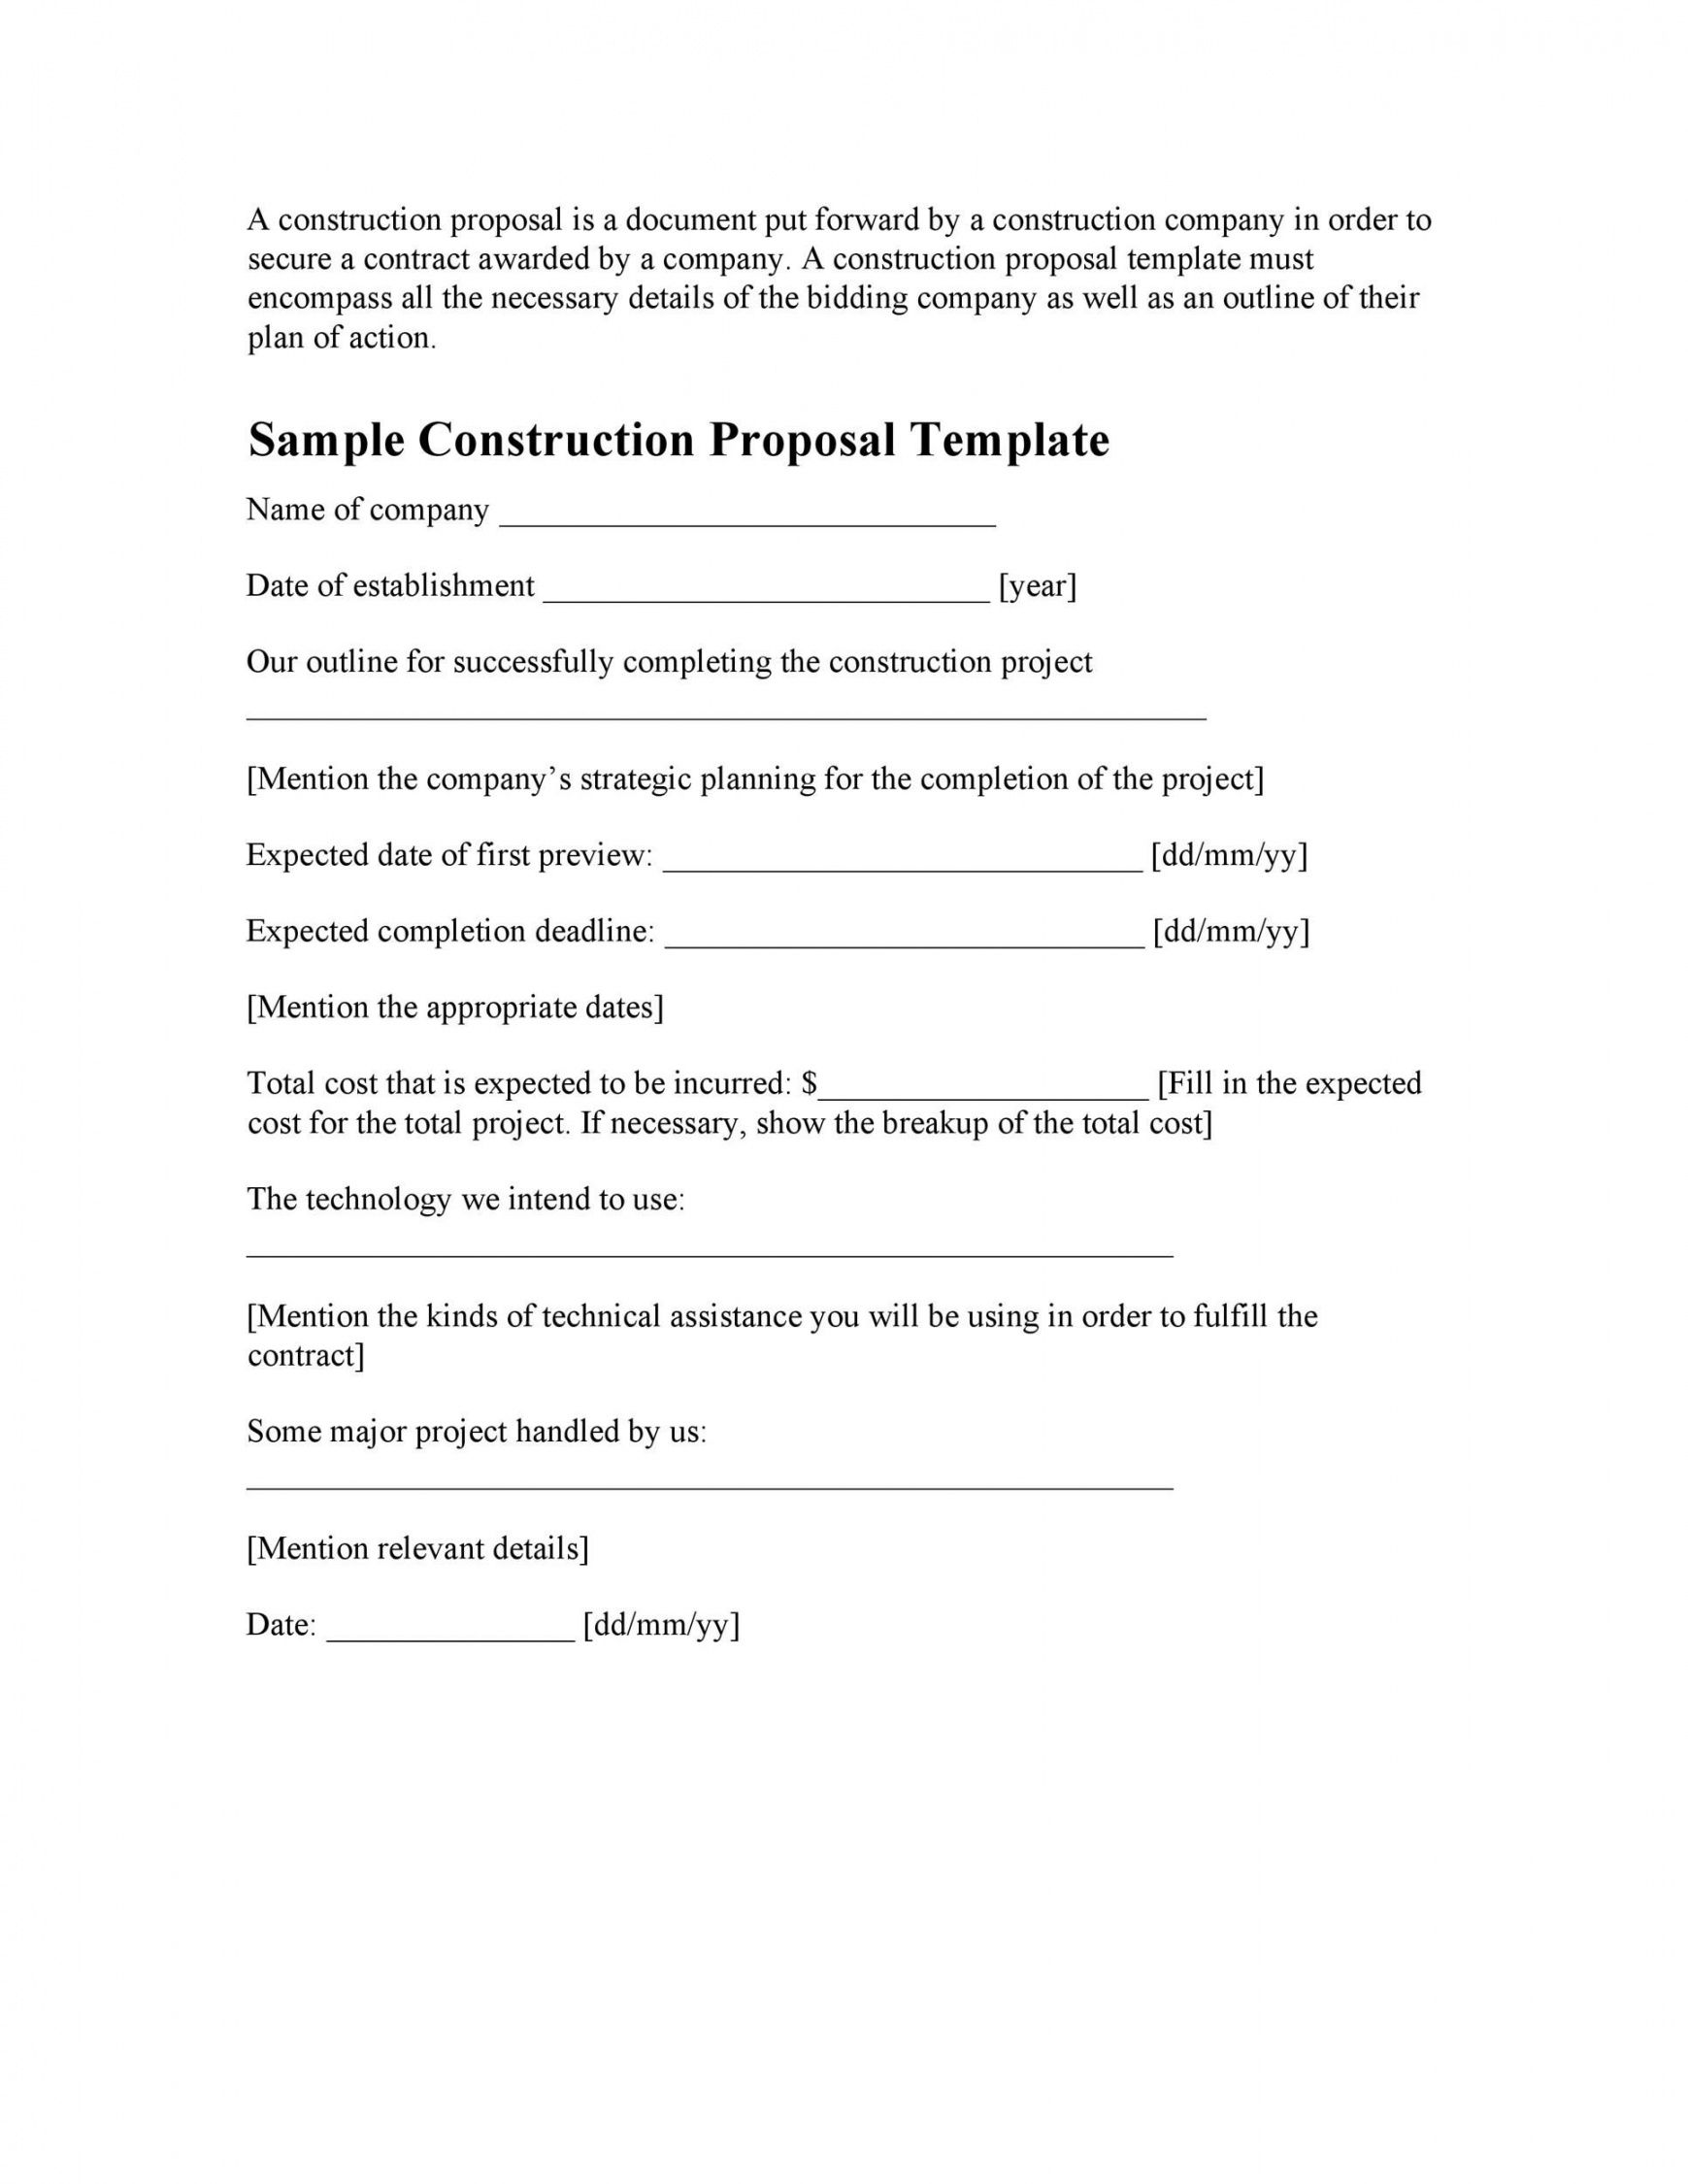 sample residential construction request for proposal template request for proposal construction template